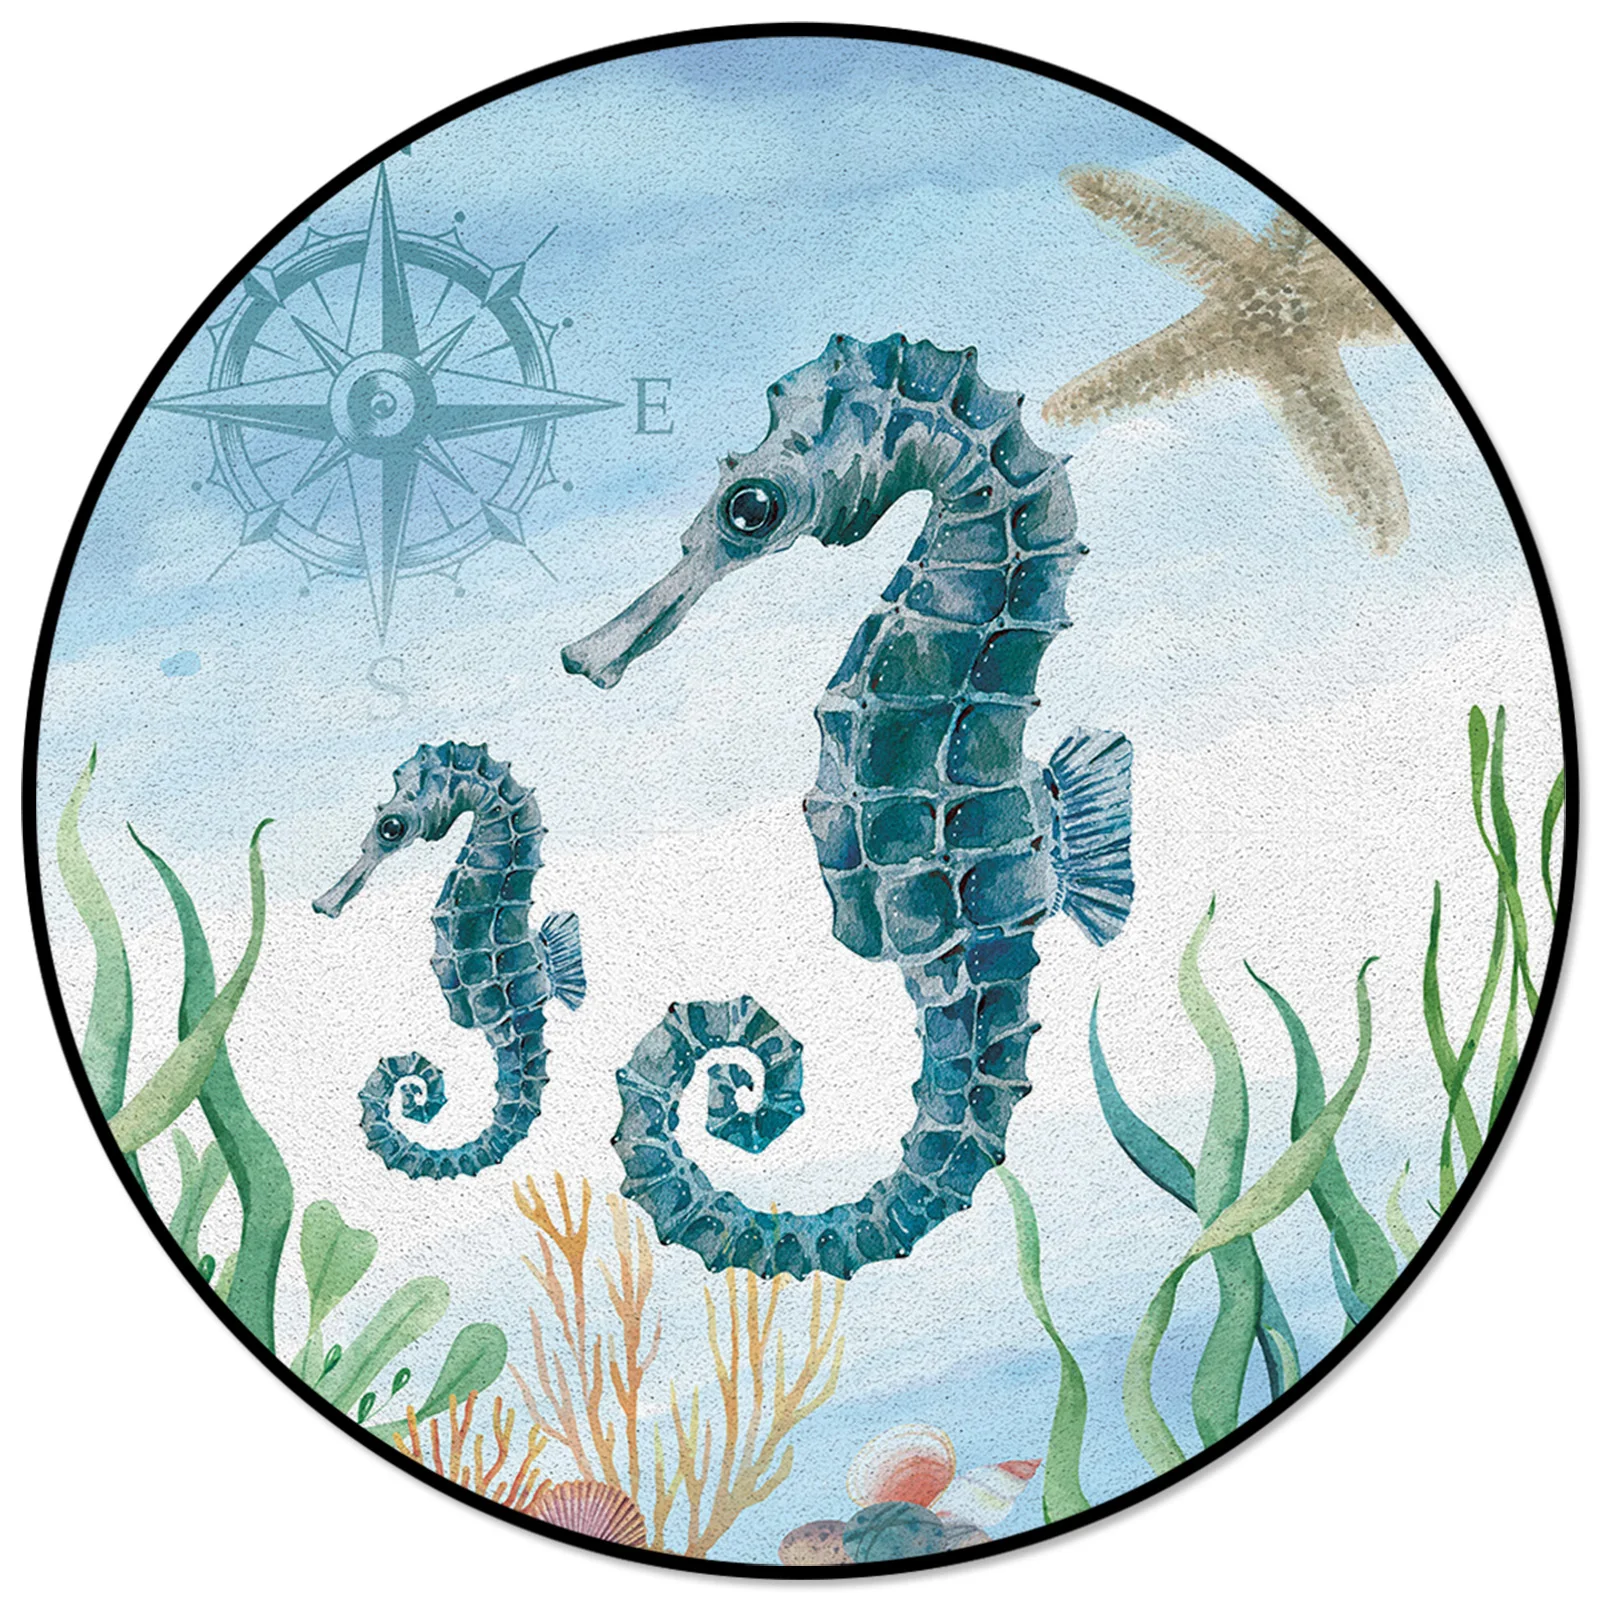 

Marine Animal Seahorse Starfish Seaweed Compass Rugs And Carpets For Home Living Room Round Rug For Children Rooms Non-slip